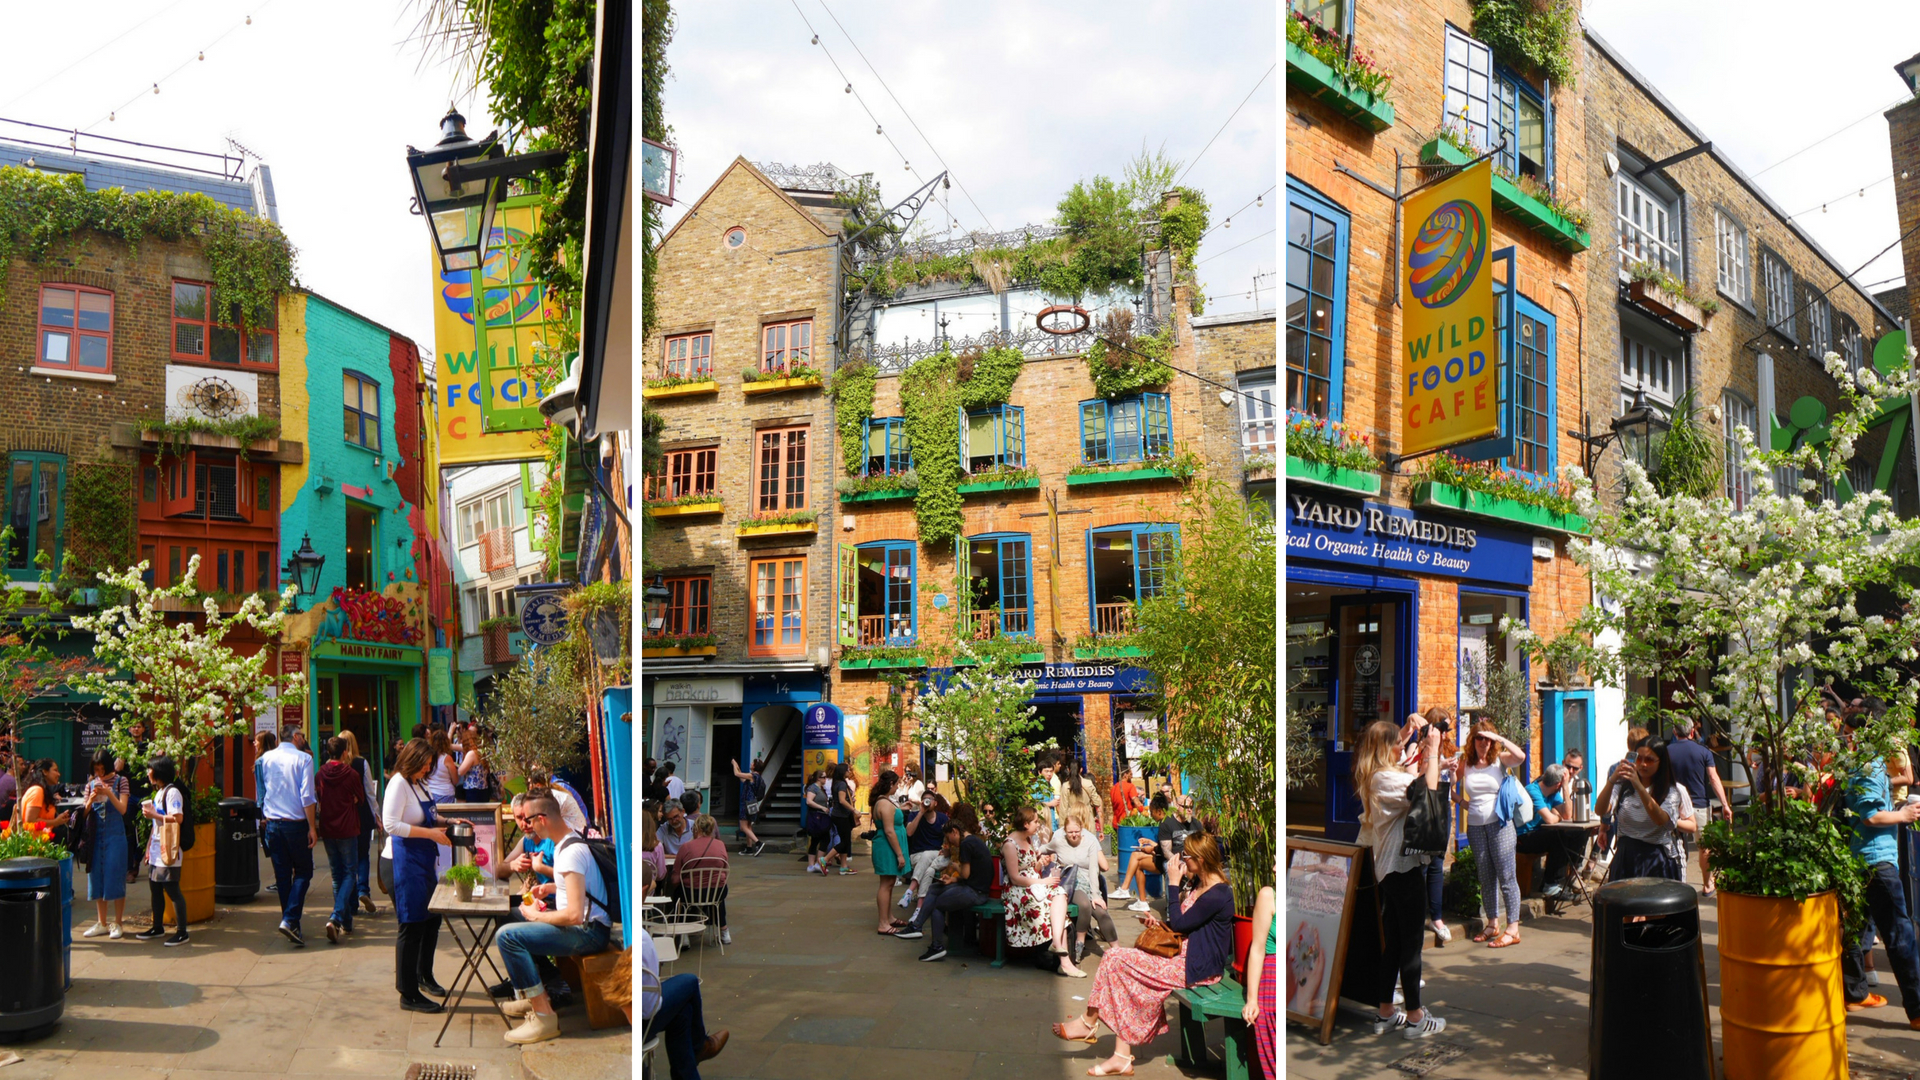 Neal's yard montage covent garden londres